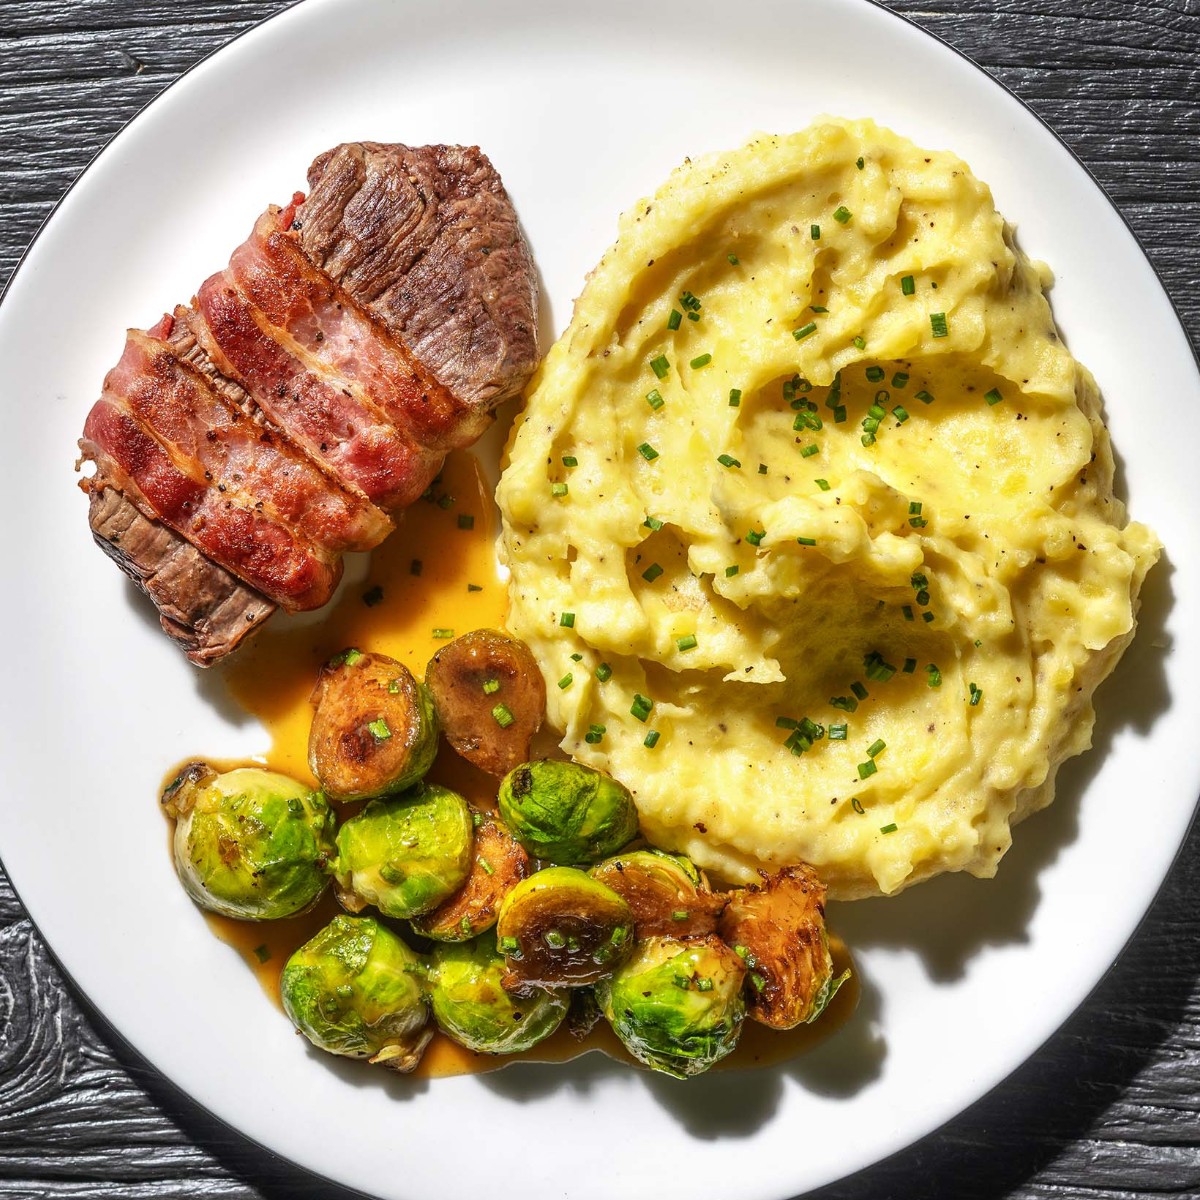 Make no mis-steak, this meal is delicious! Get the recipe here 👉 hfrsh.me/3o #hellofresh #foodpun #funny #steakmeal